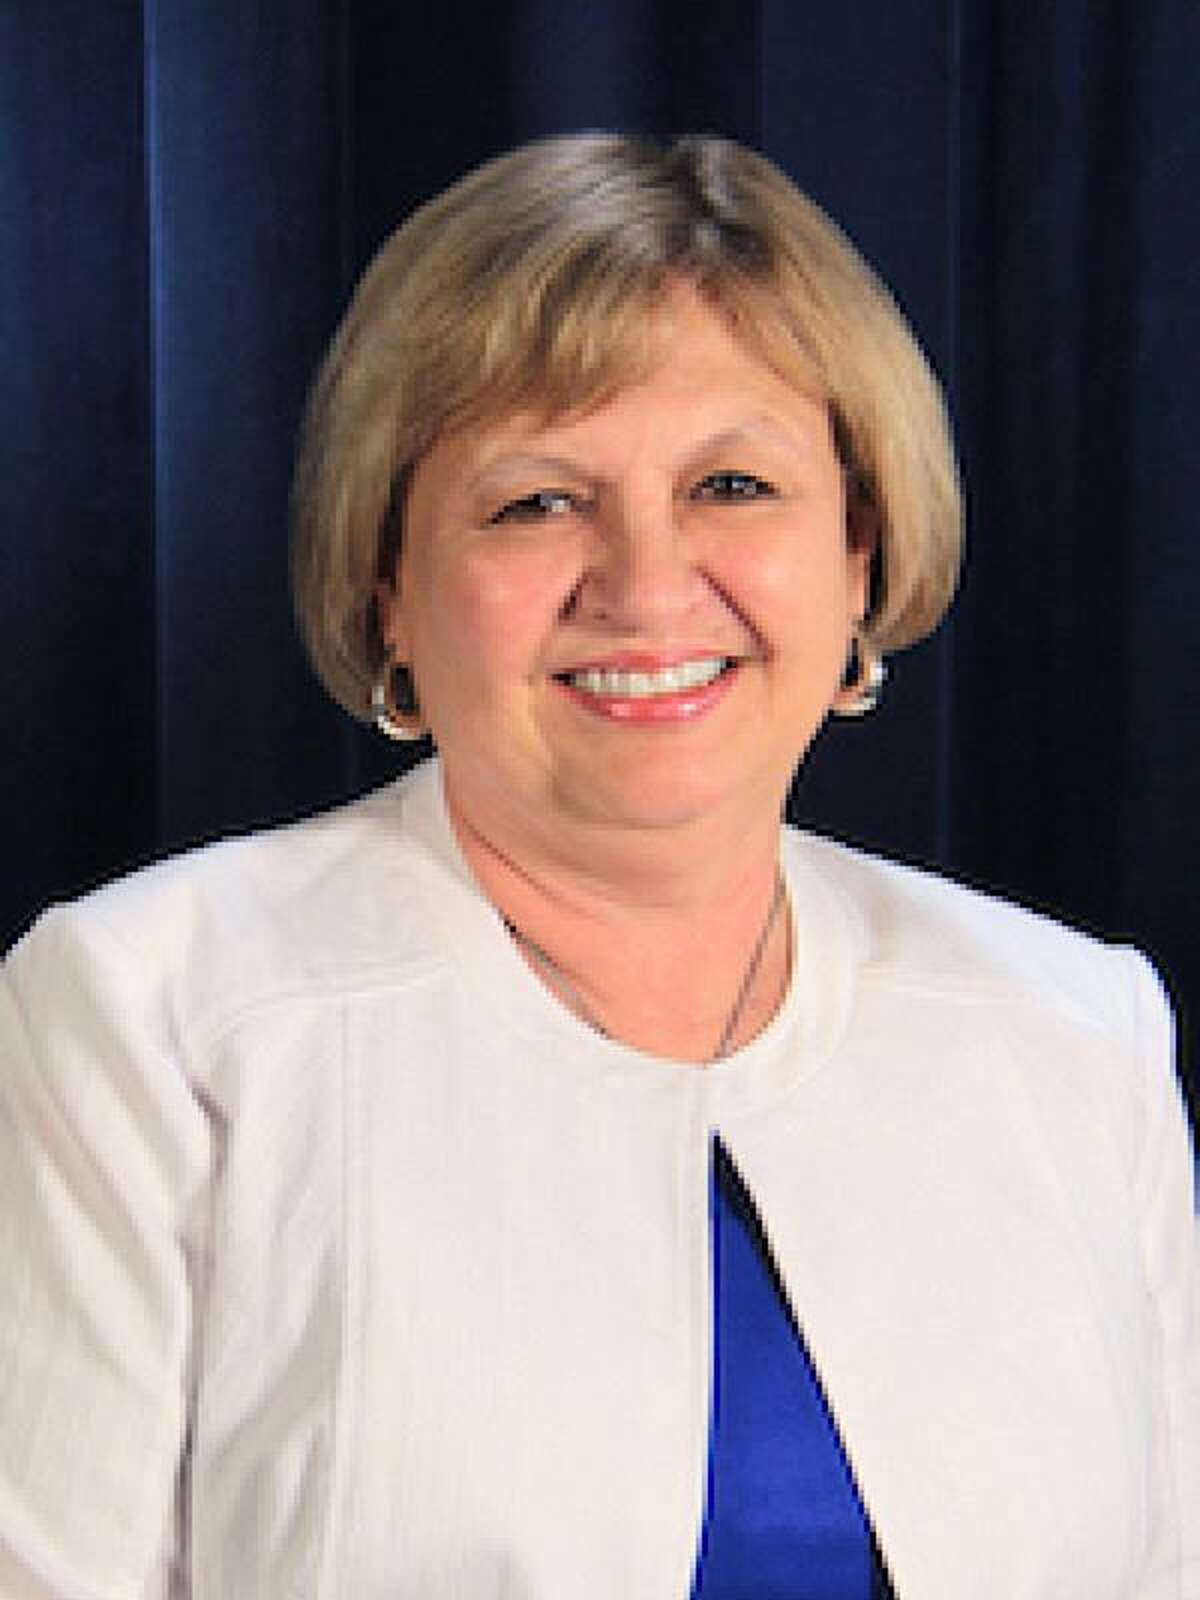 Karen Freeman, a long-time NISD community volunteer, was elected to the Board of Trustees in 2005 and was re-elected for her fourth term in May 2017. She currently serves as Vice President.